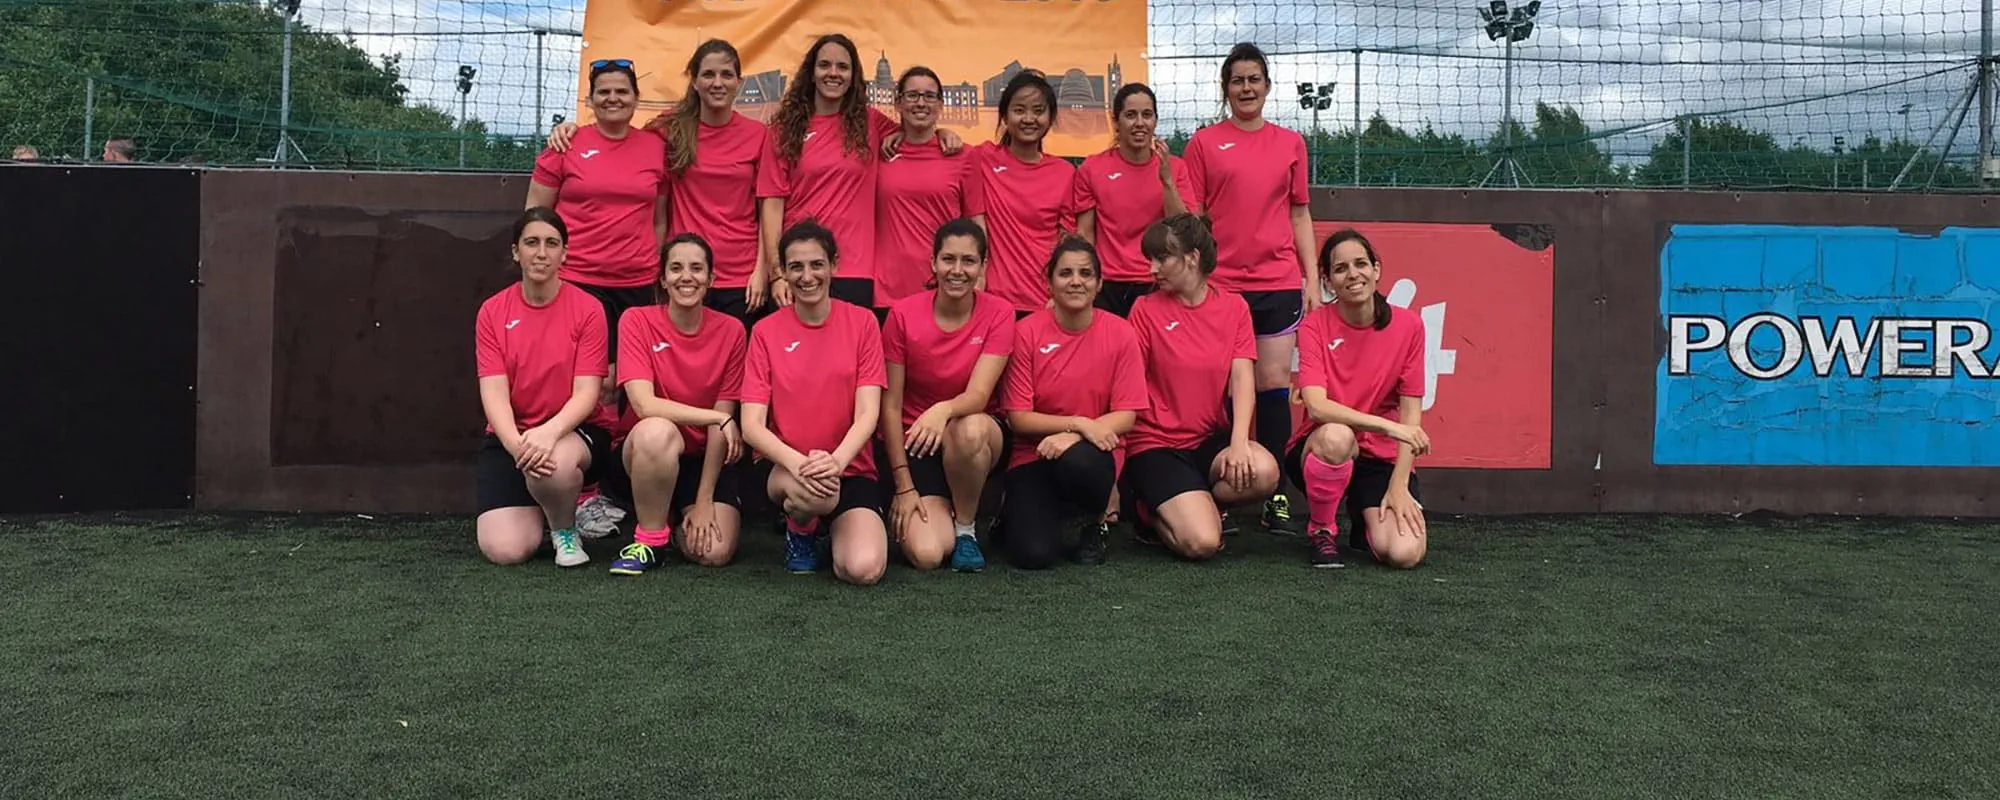 Madrid office football team take part in a tournament